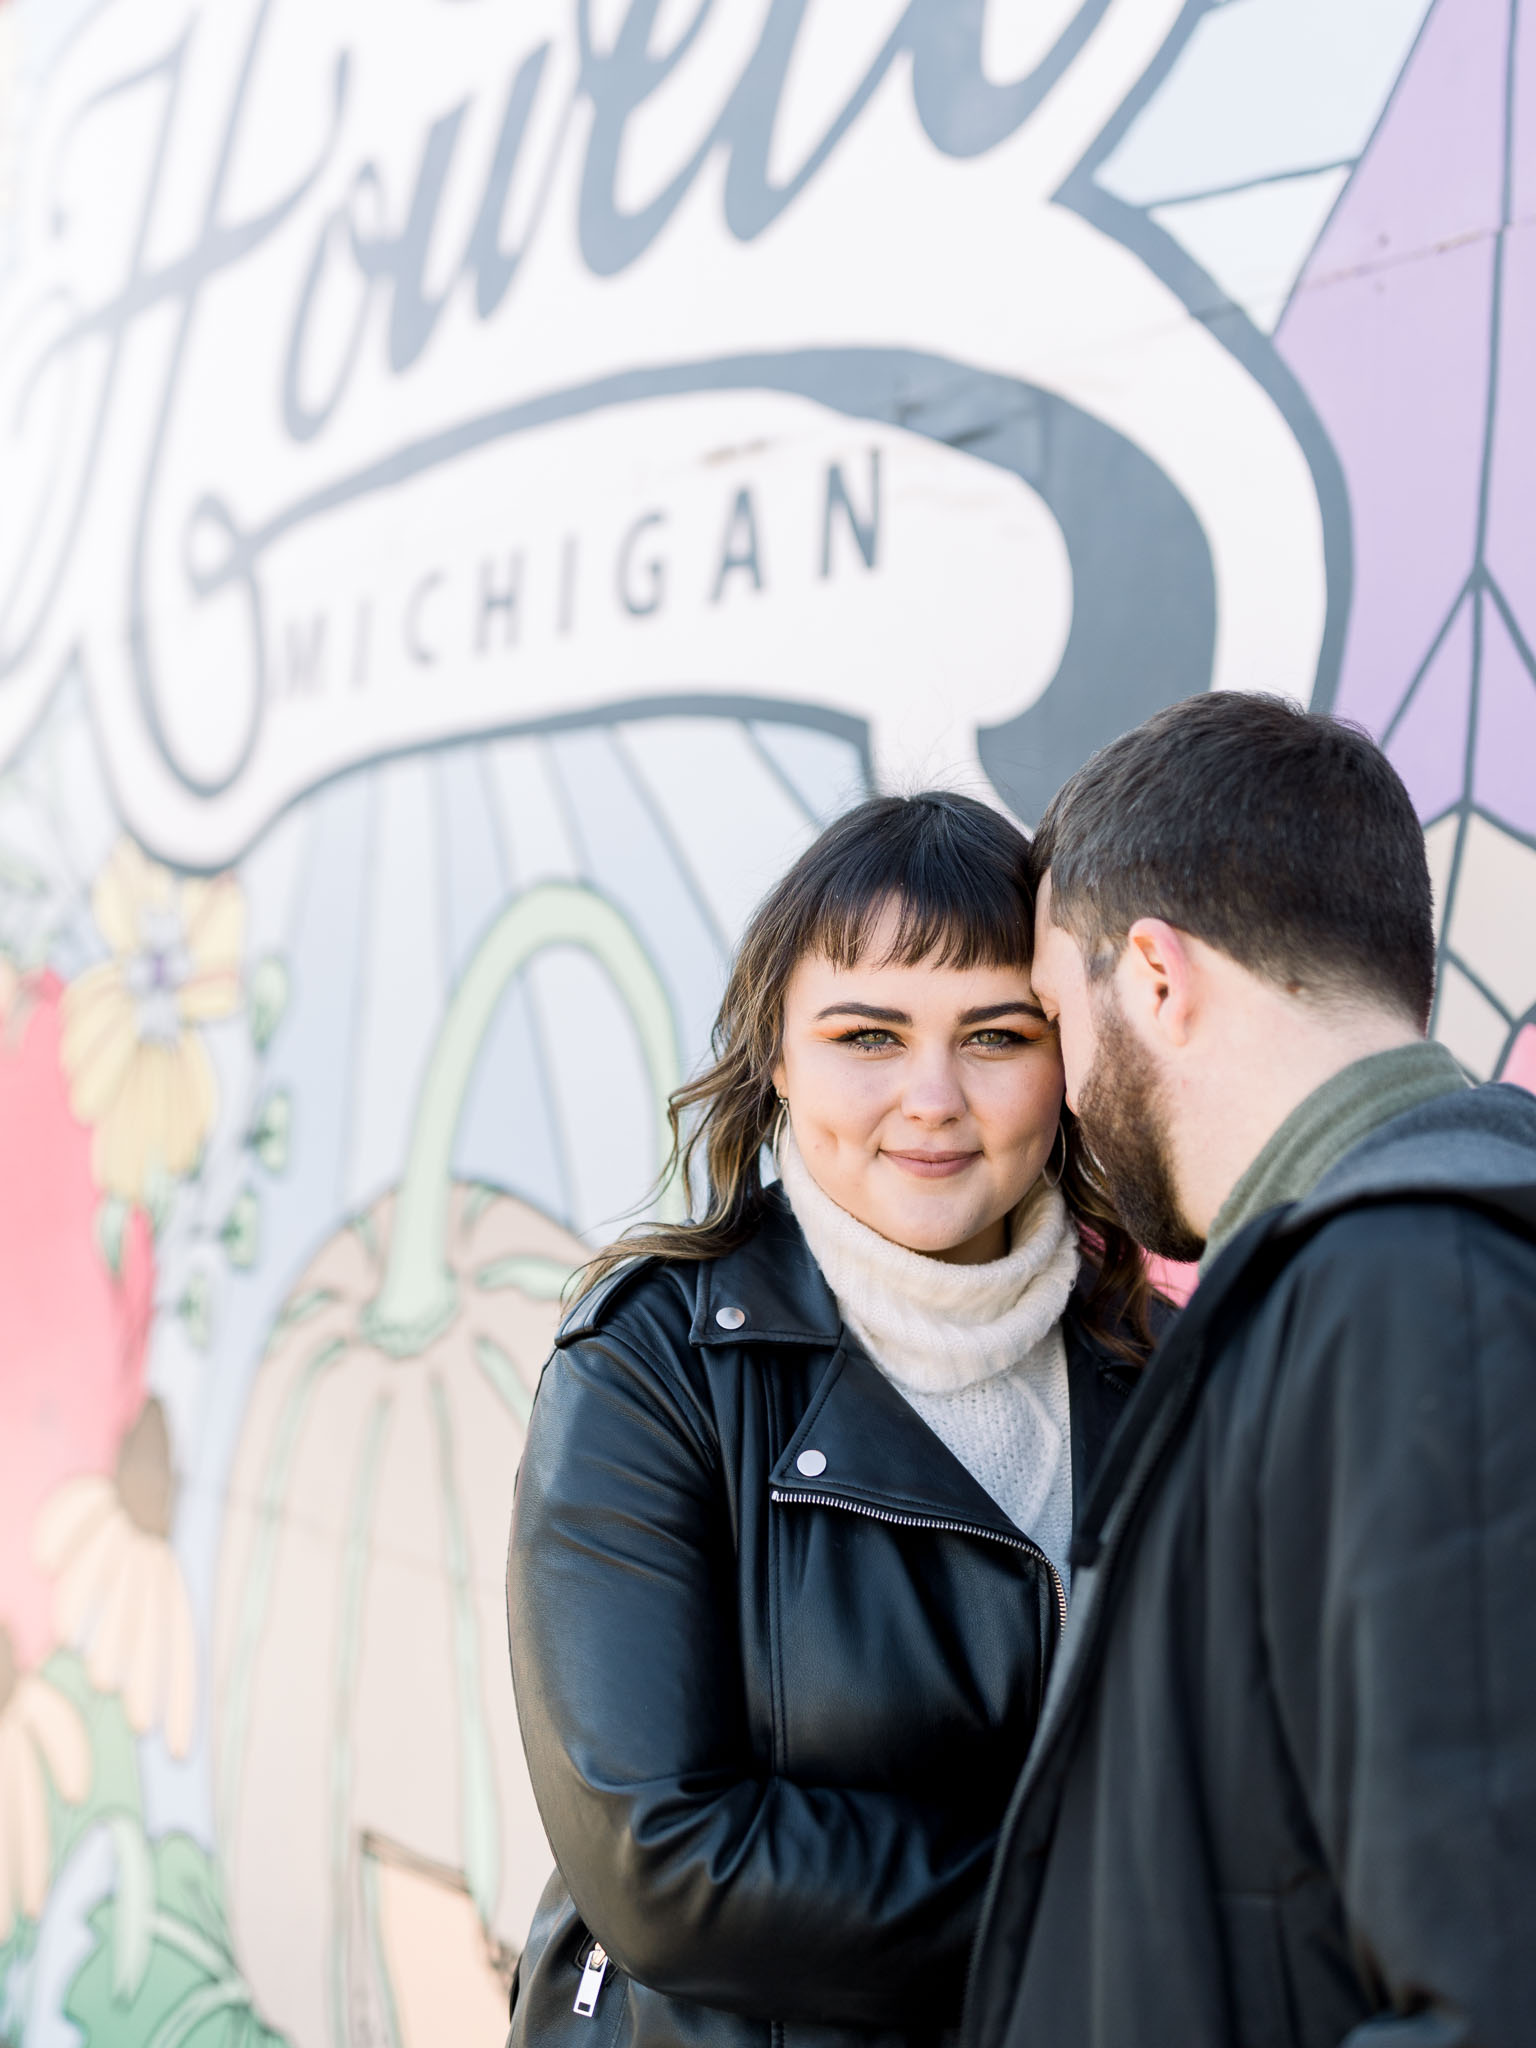 Downtown Howell Engagement Session in front of Mural Wall